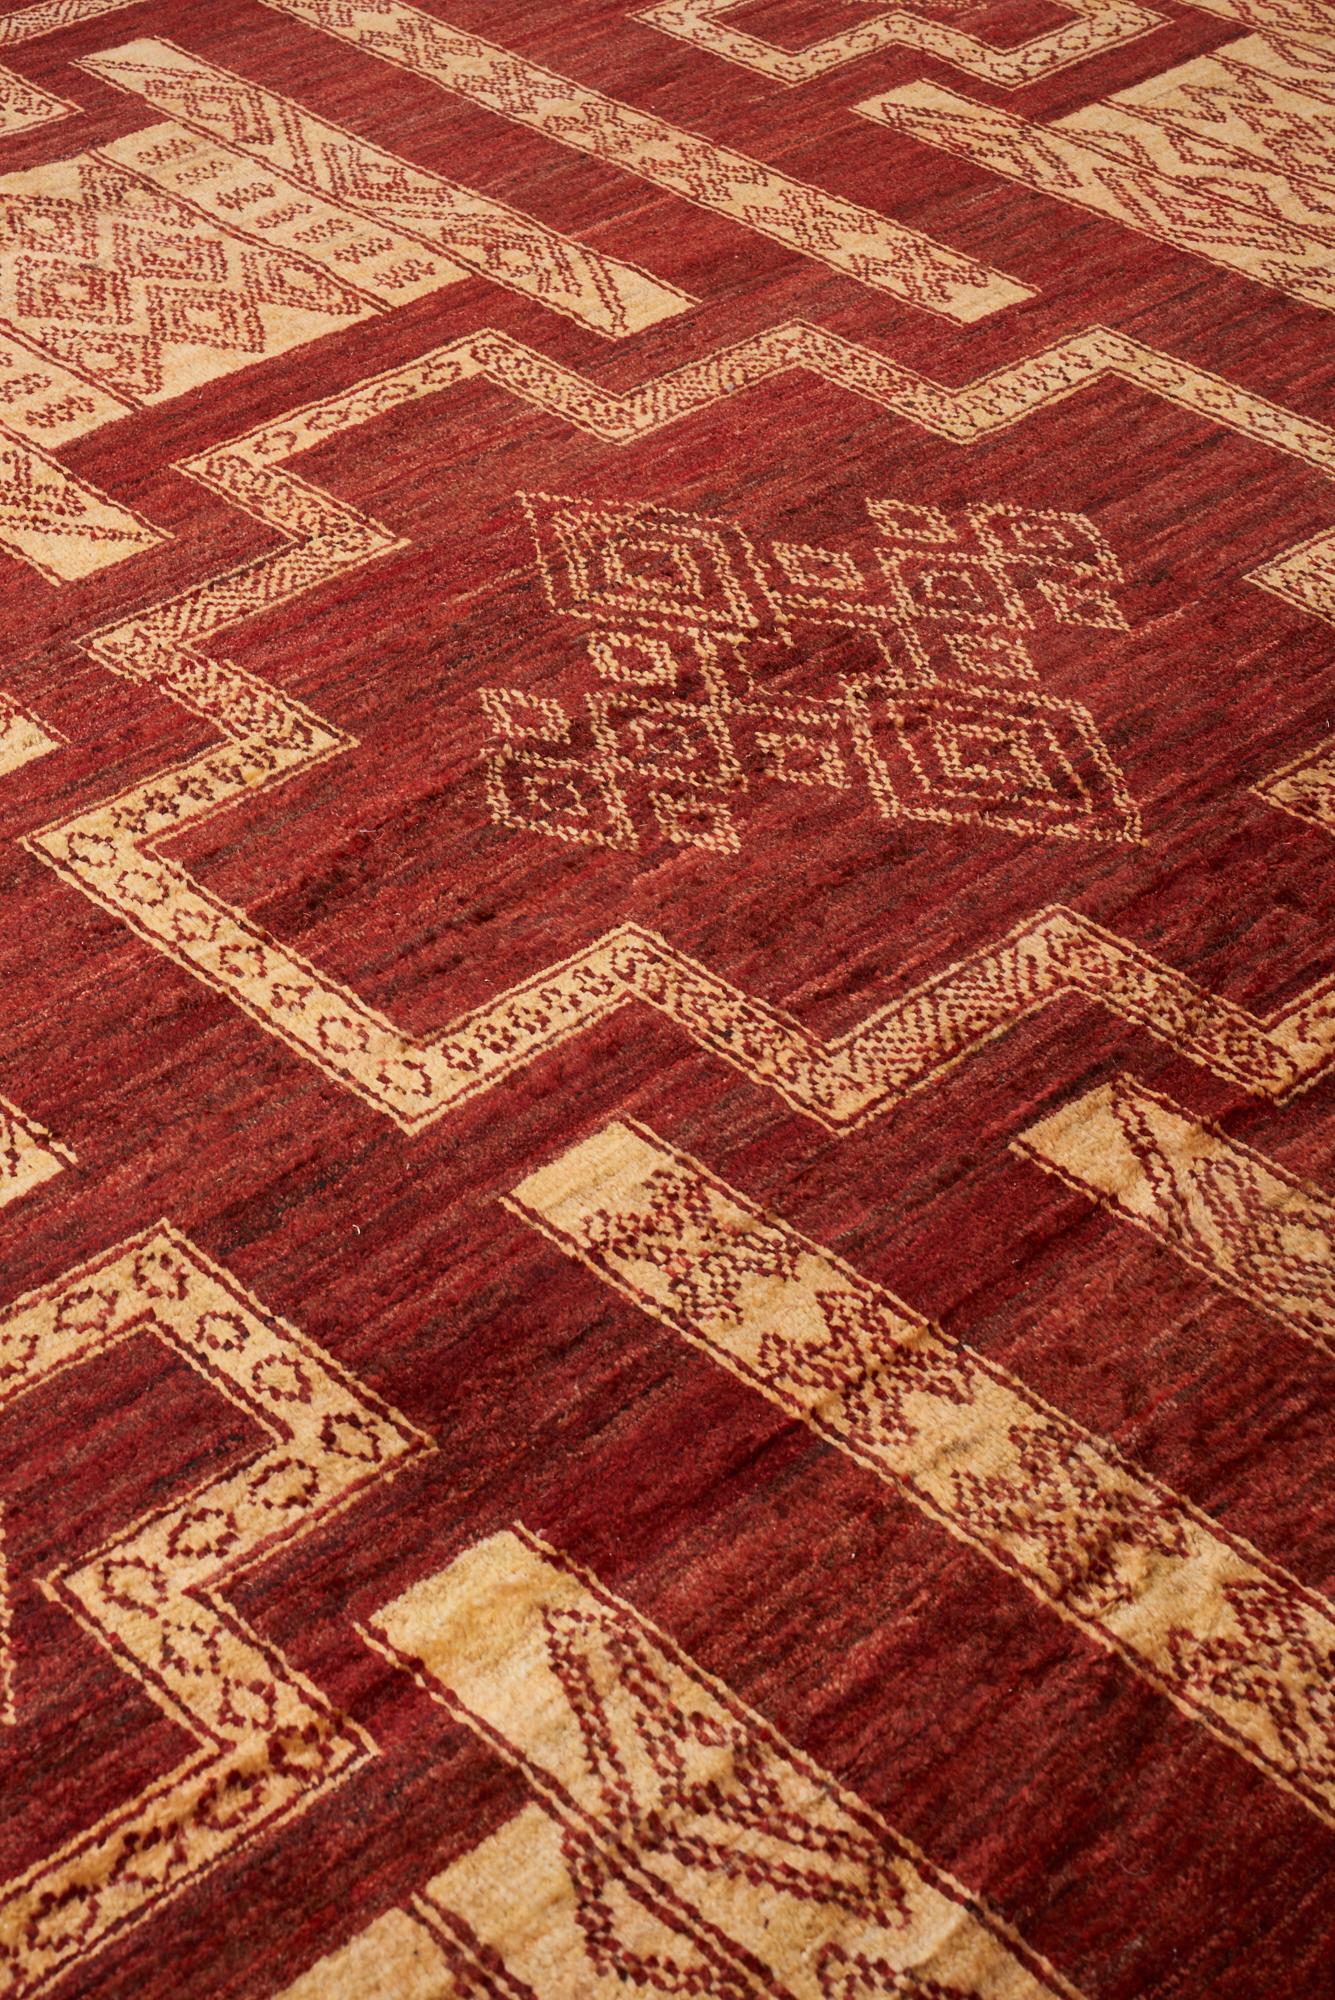 Lose yourself in the rich colors and intricate designs of the Arua collection. Inspired by the most resilient desert dwellers of the Saharas, these hand-knotted rugs are made with wool from the highlands of Afghanistan. Traditional tribal symbols